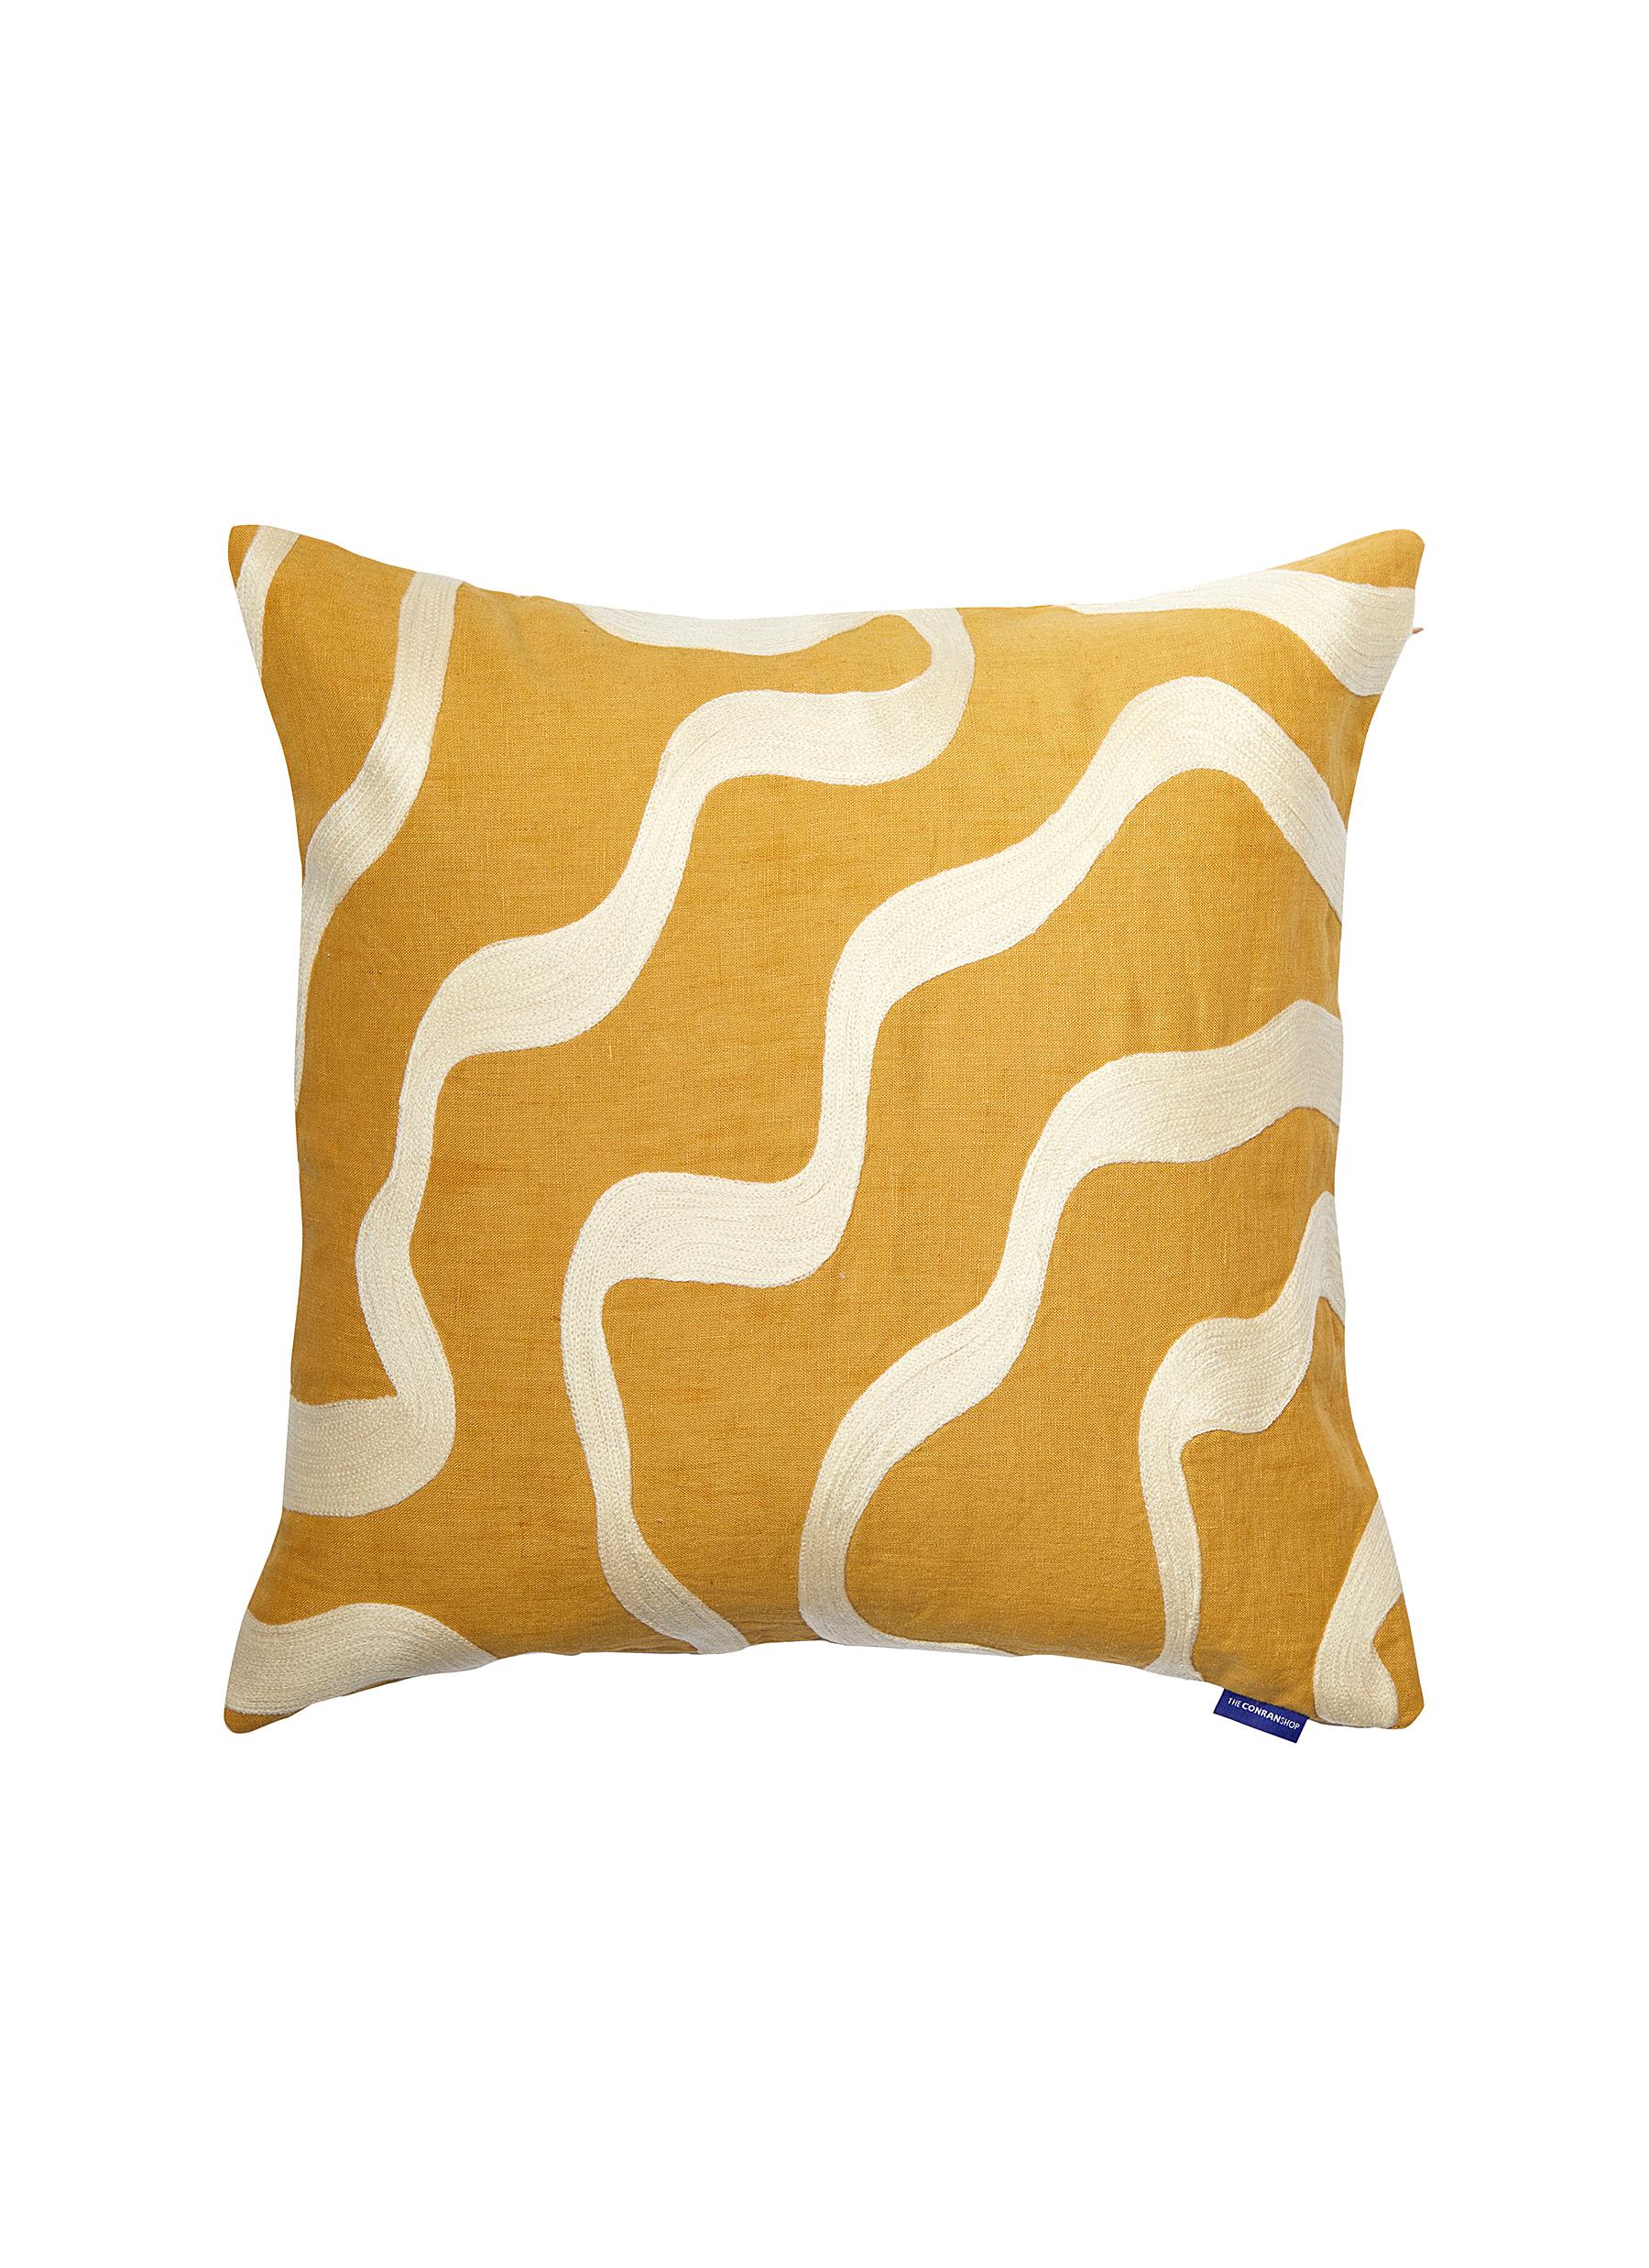 Scribble Crewel Cushion Cover - Mustard